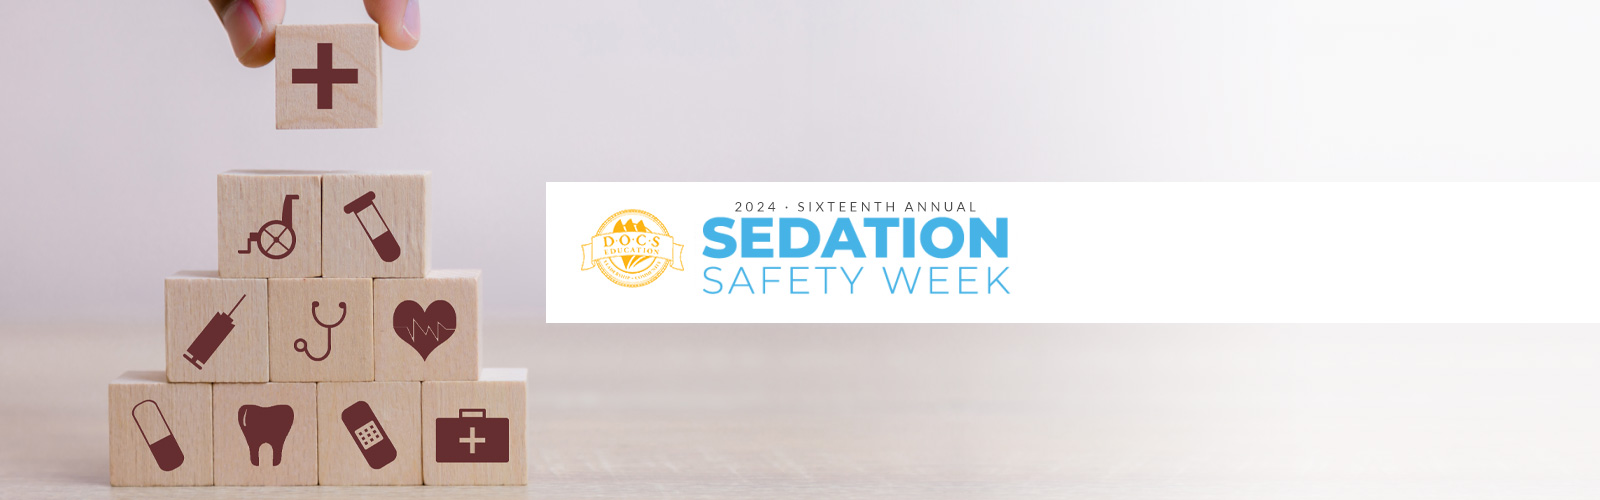 All You Need to Know About DOC’s 16th Annual Sedation Safety Week